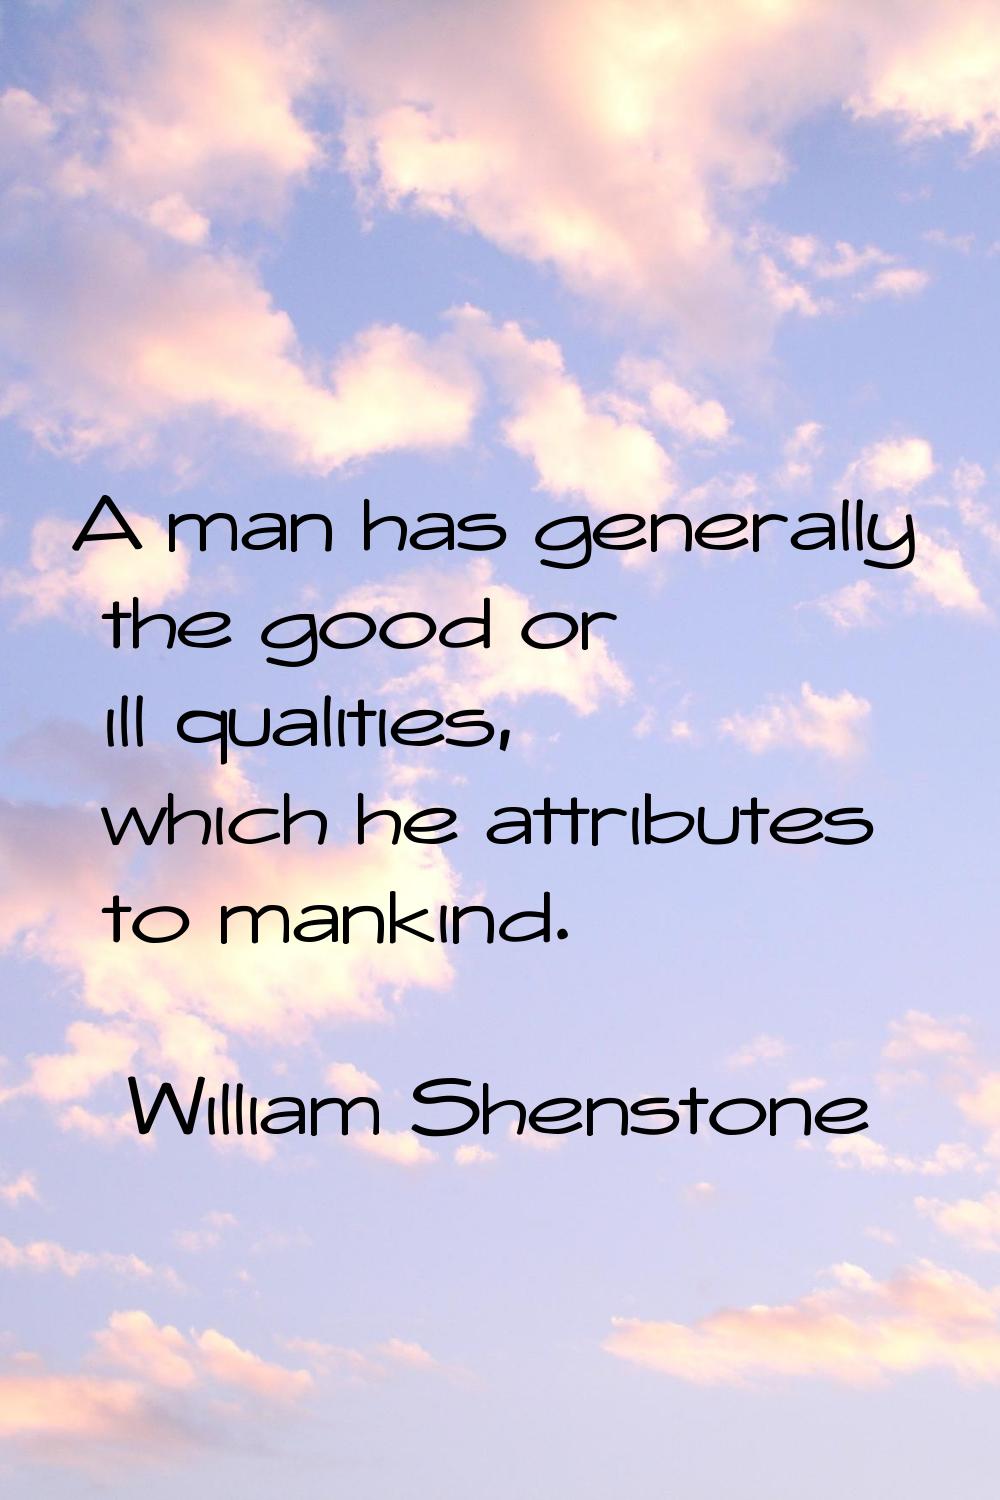 A man has generally the good or ill qualities, which he attributes to mankind.